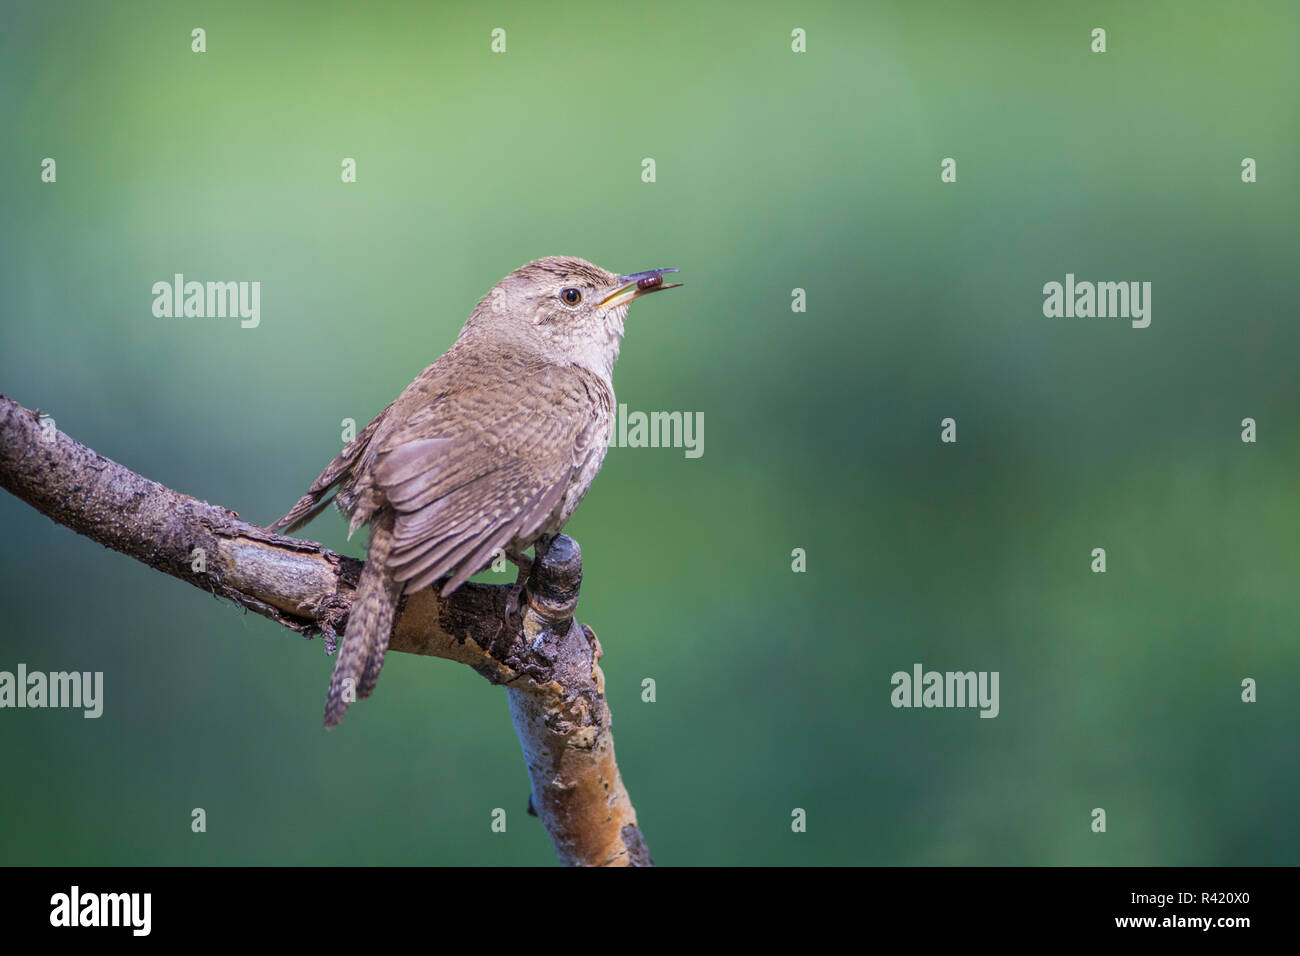 USA, Wyoming, Sublette County. House Wren carrying a small insect to feed its nestlings Stock Photo